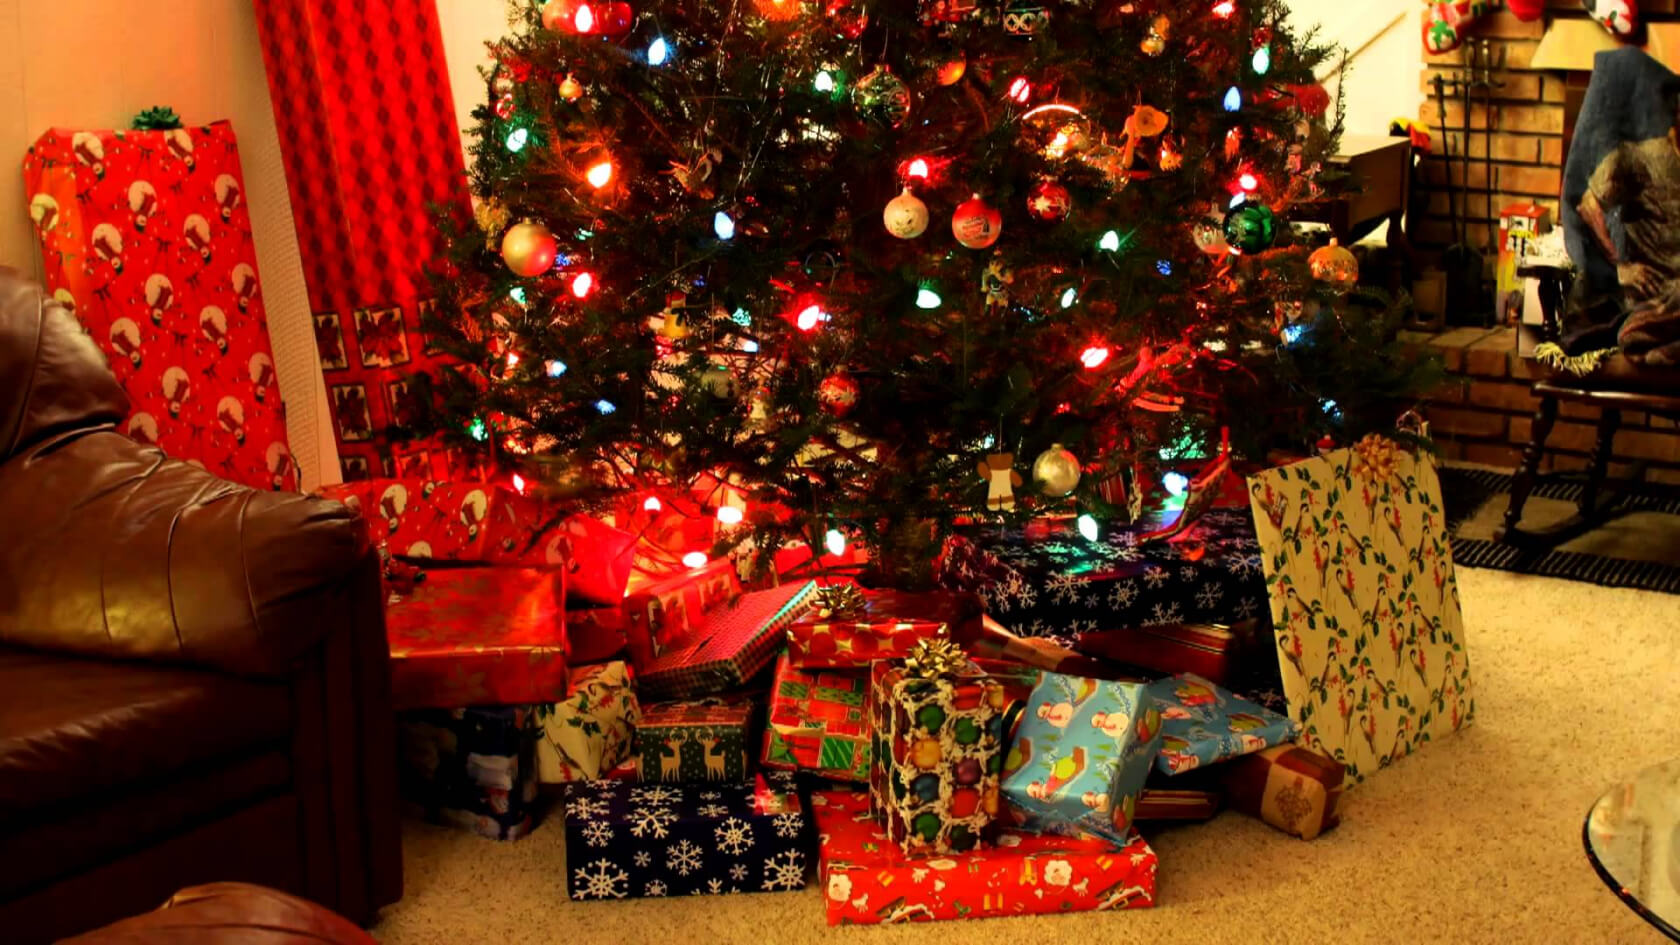 What tech gifts are under your Christmas tree this year?